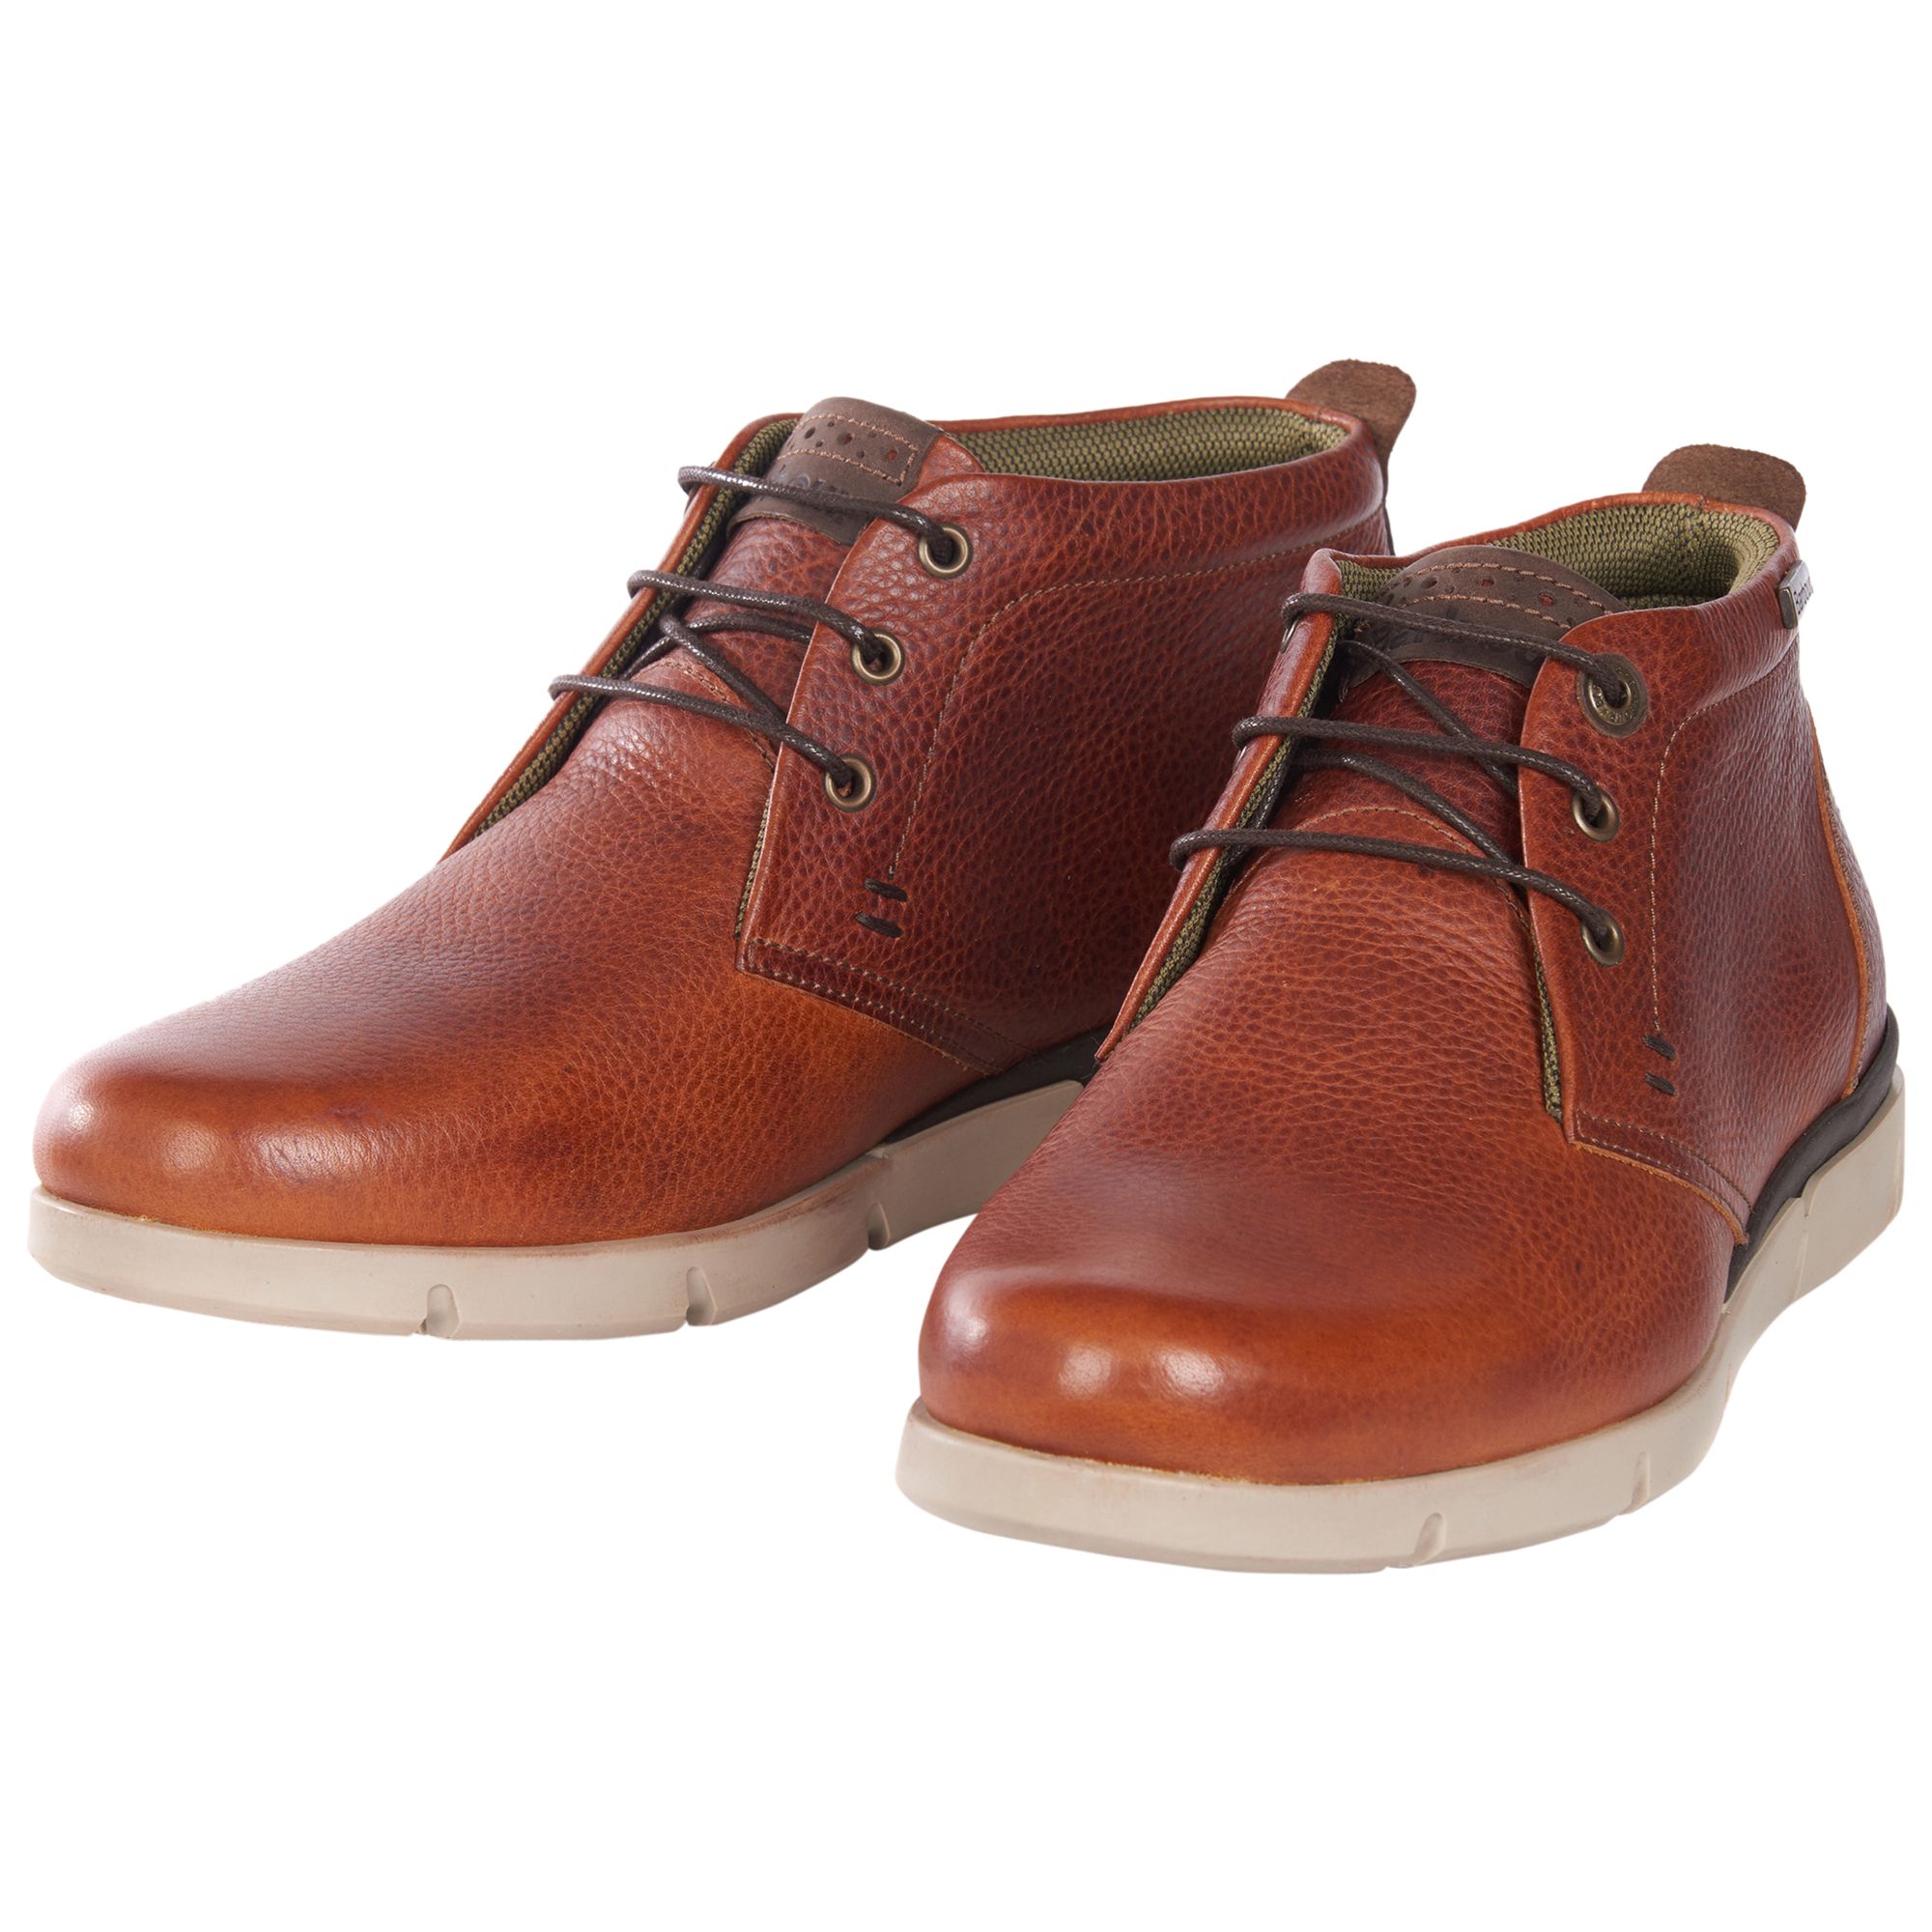 Barbour Collier Chukka Boots, Cognac at 